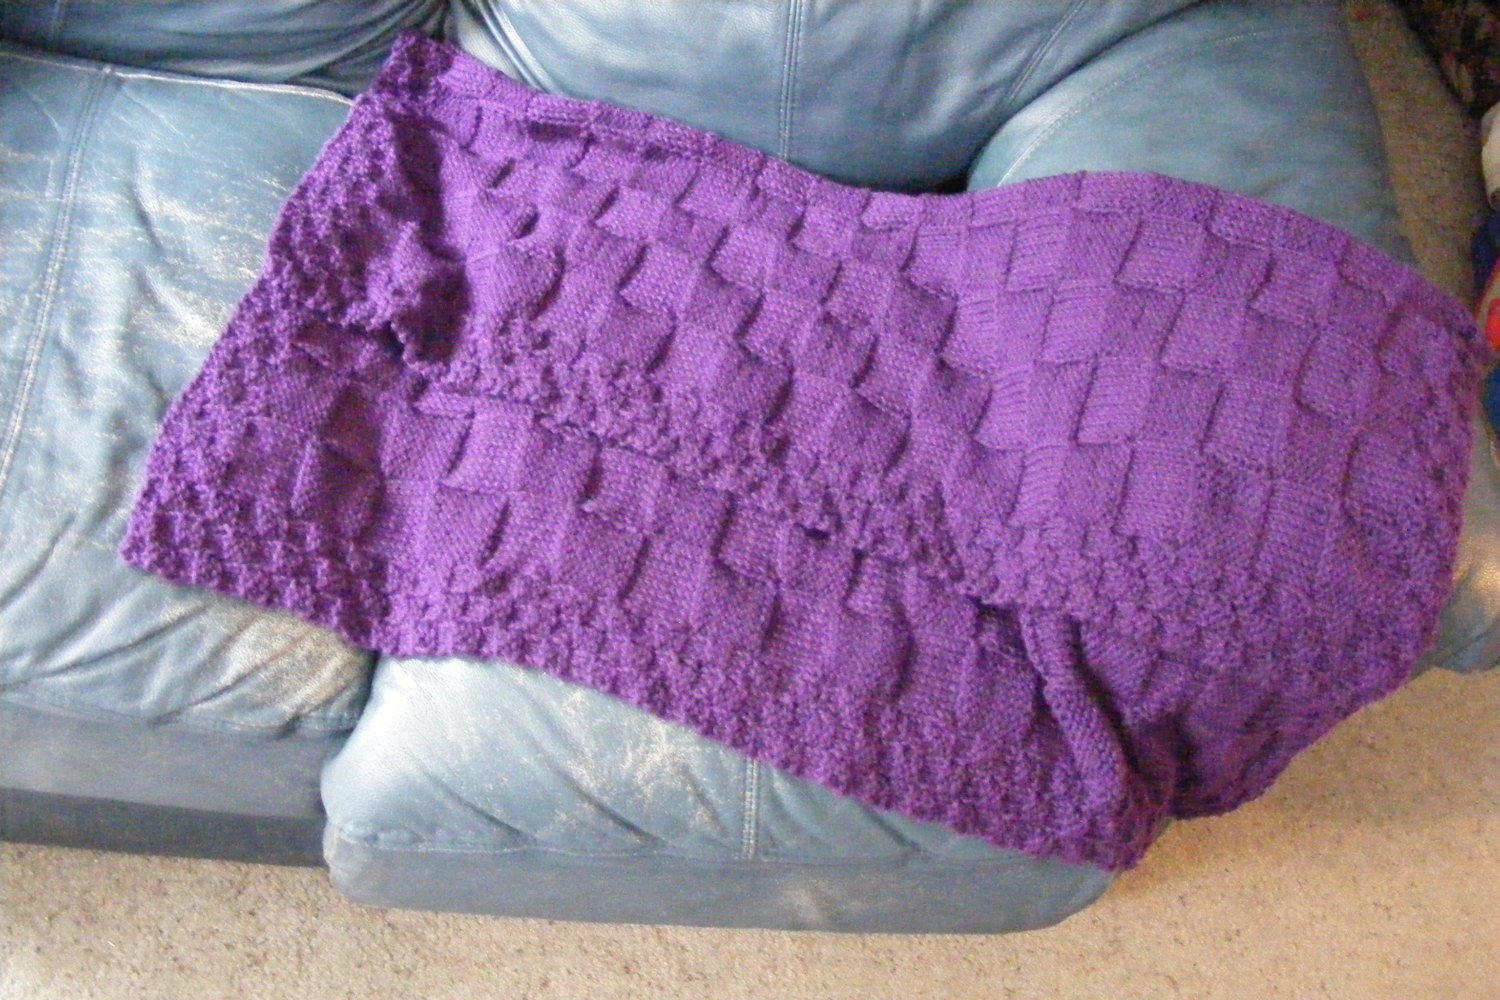 Checkerboard Afghan Knit Dark Purple 42 inches square